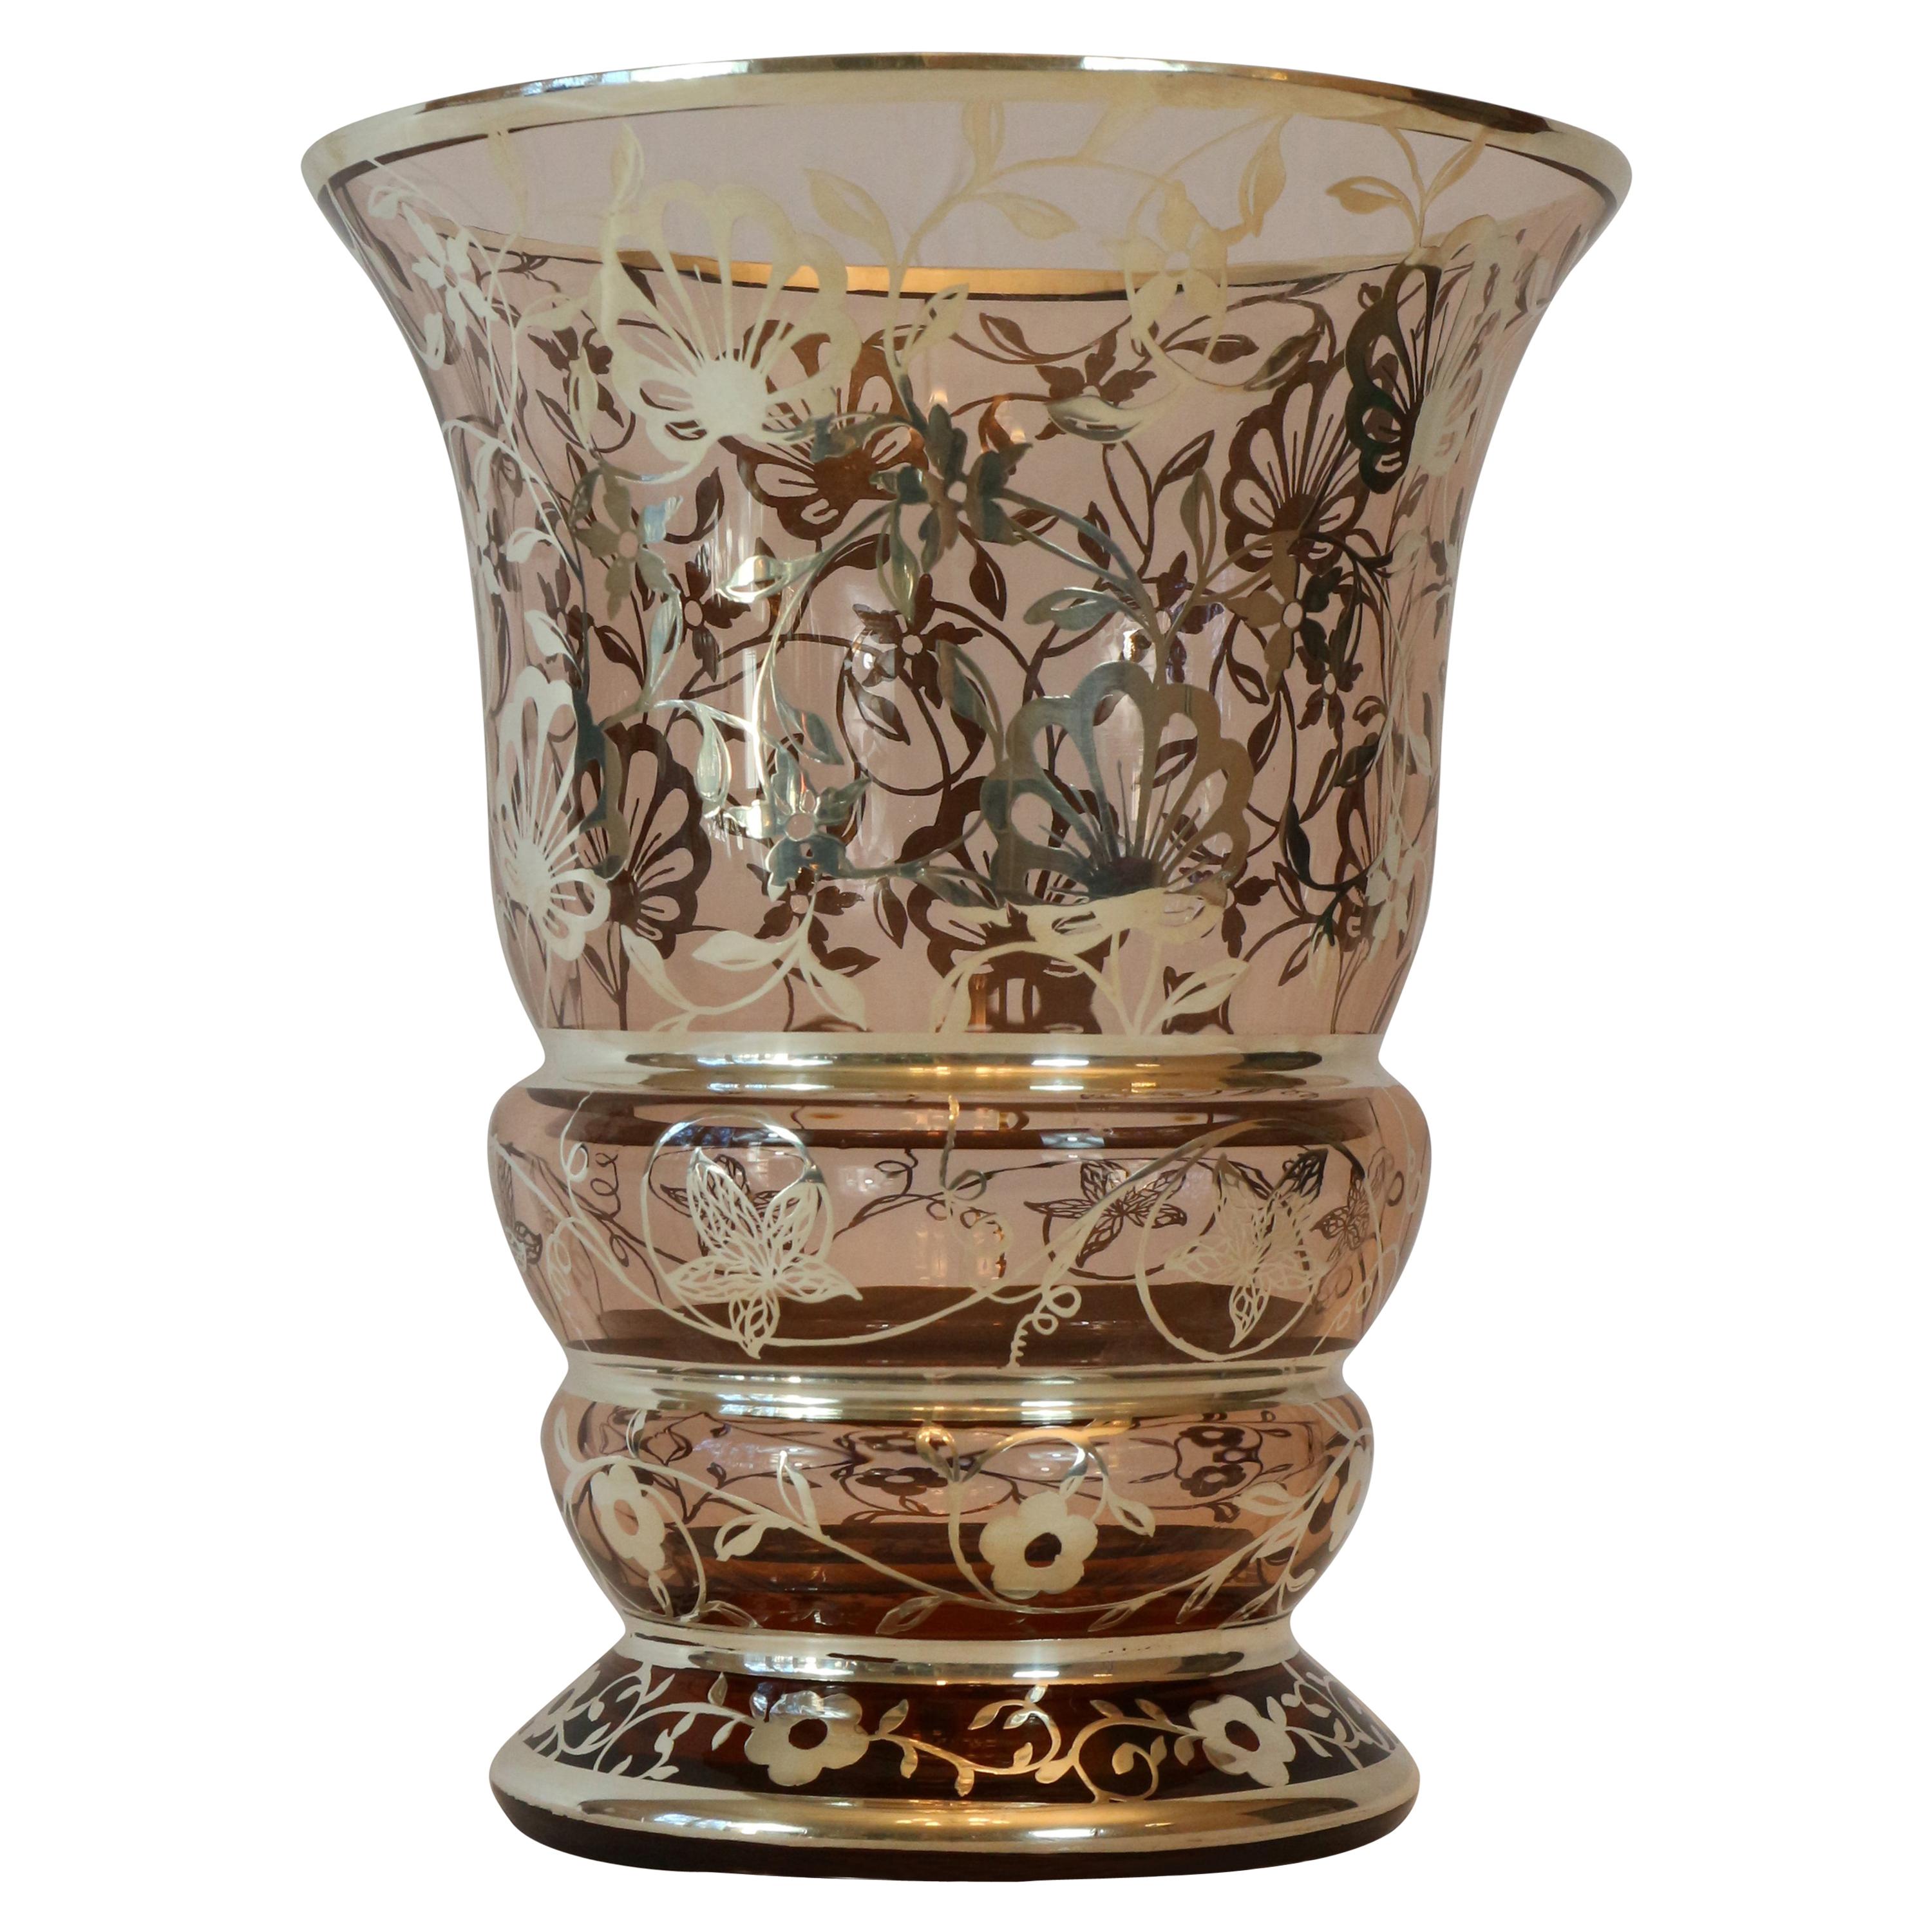  Italian art deco  glass vase covered in silver with floral motifs